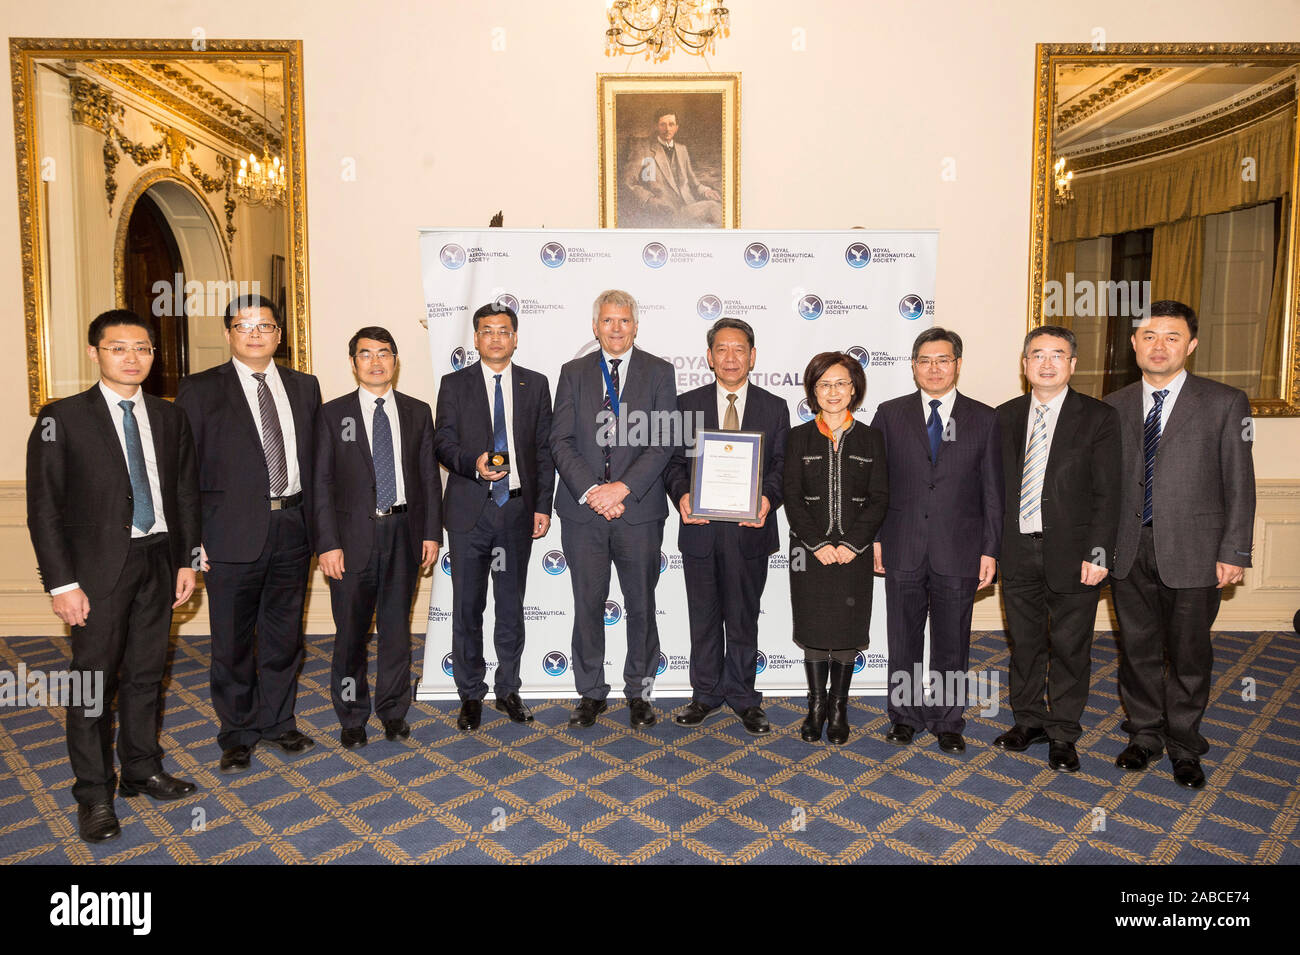 Beijing, Britain. 25th Nov, 2019. Members of China's Chang'e-4 mission team pose for a group photo with guests at the awarding ceremony of the Royal Aeronautical Society (RAeS) in London, Britain, on Nov. 25, 2019. Credit: Ray Tang/Xinhua/Alamy Live News Stock Photo